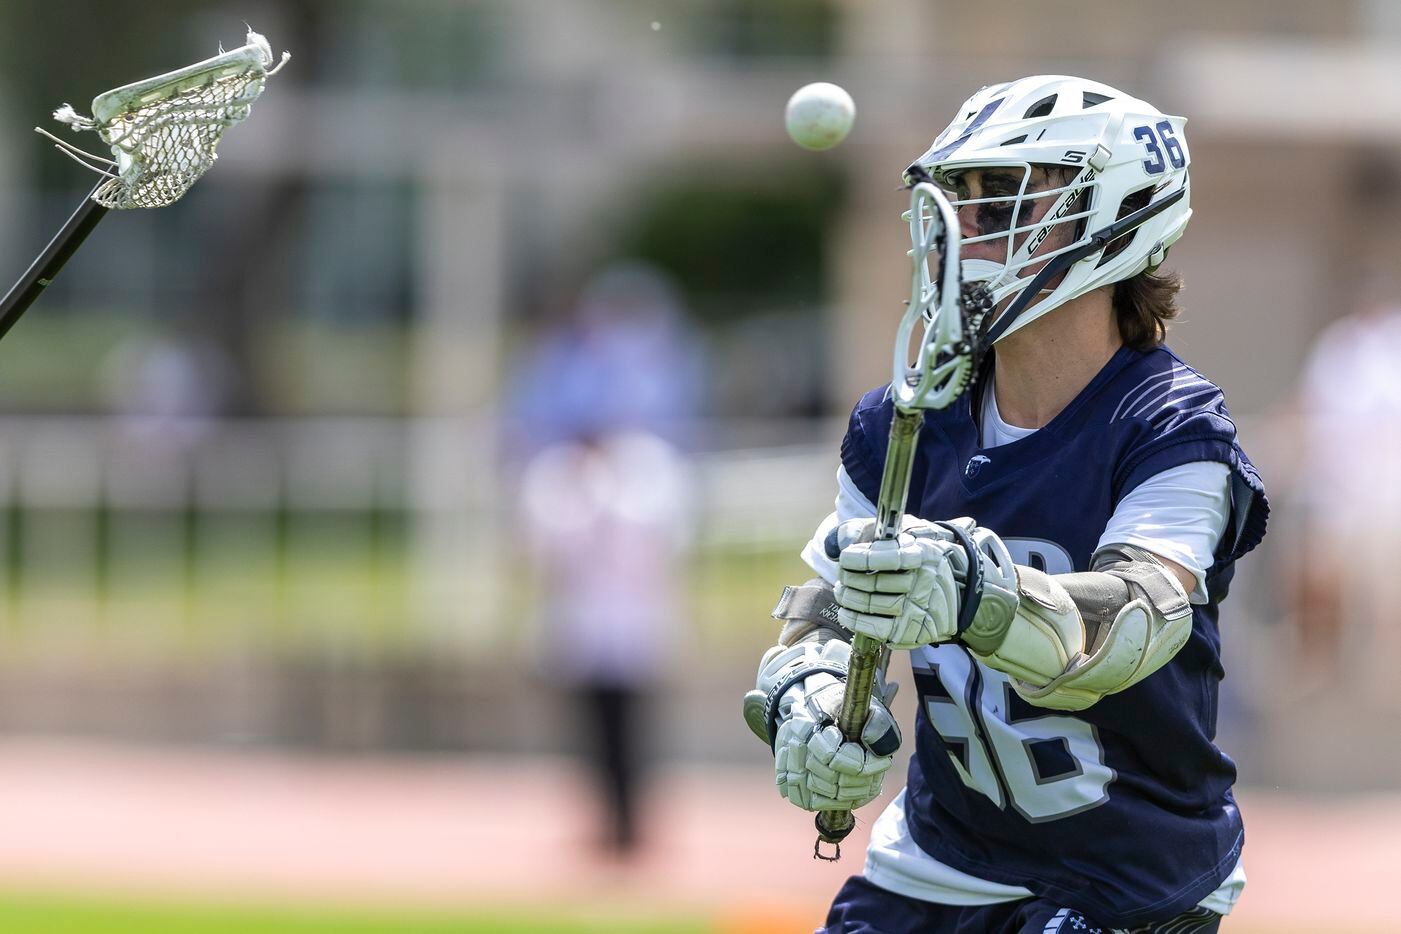 Episcopal School of Dallas’ Jack Whitham (36) takes a shot on goal against St. Mark's during...